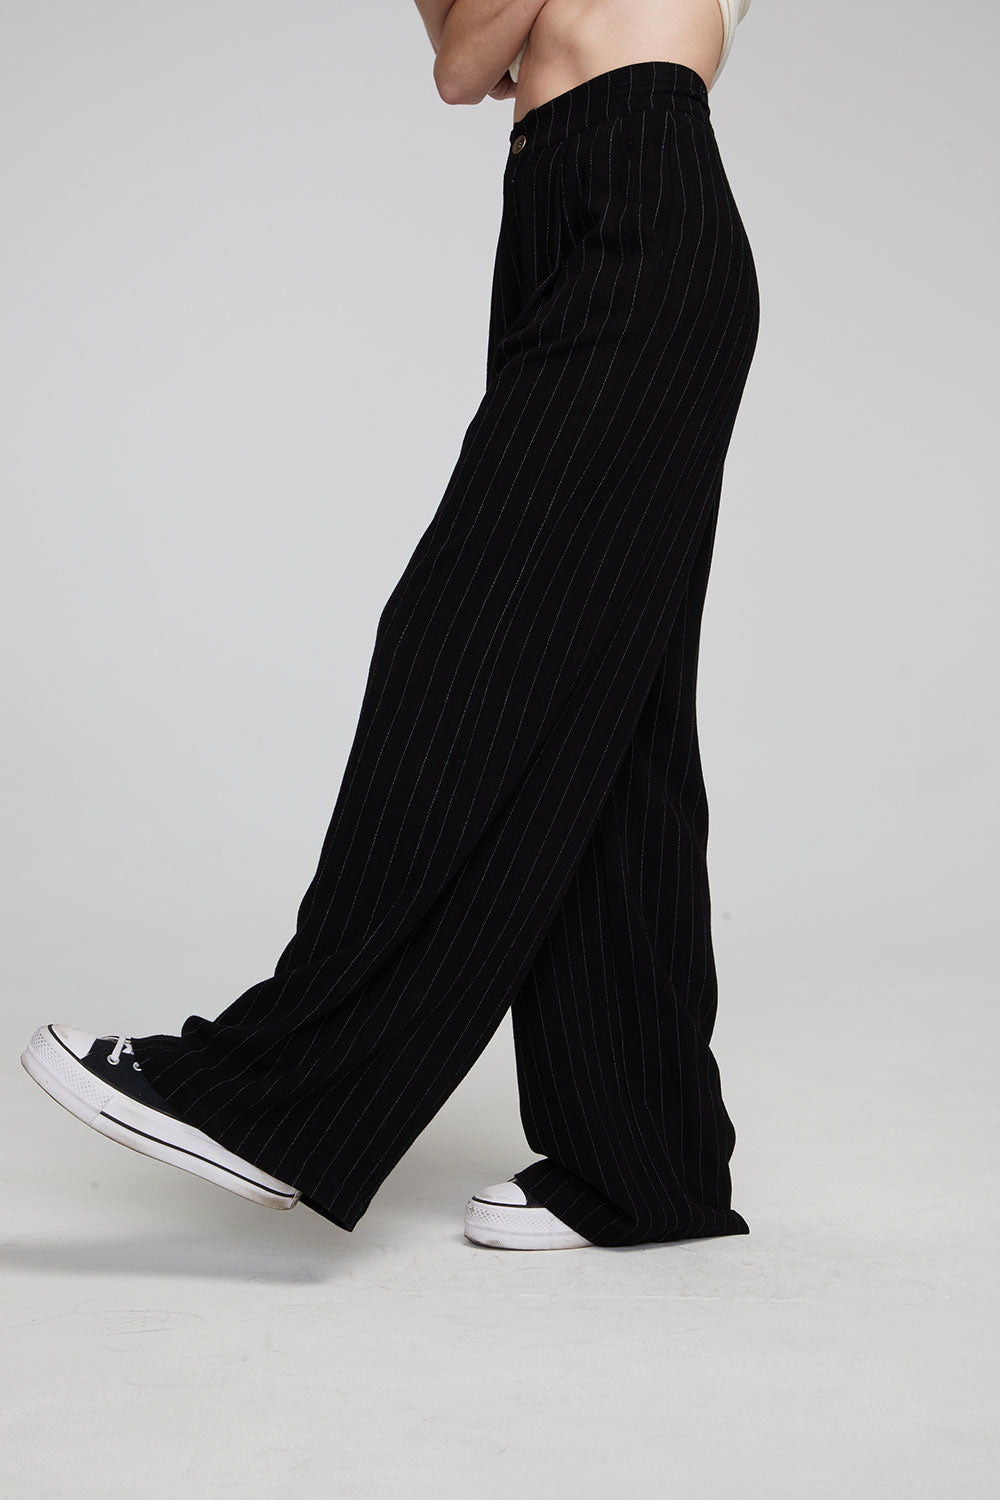 Theo Beverly Pinstripe Trousers WOMENS chaserbrand